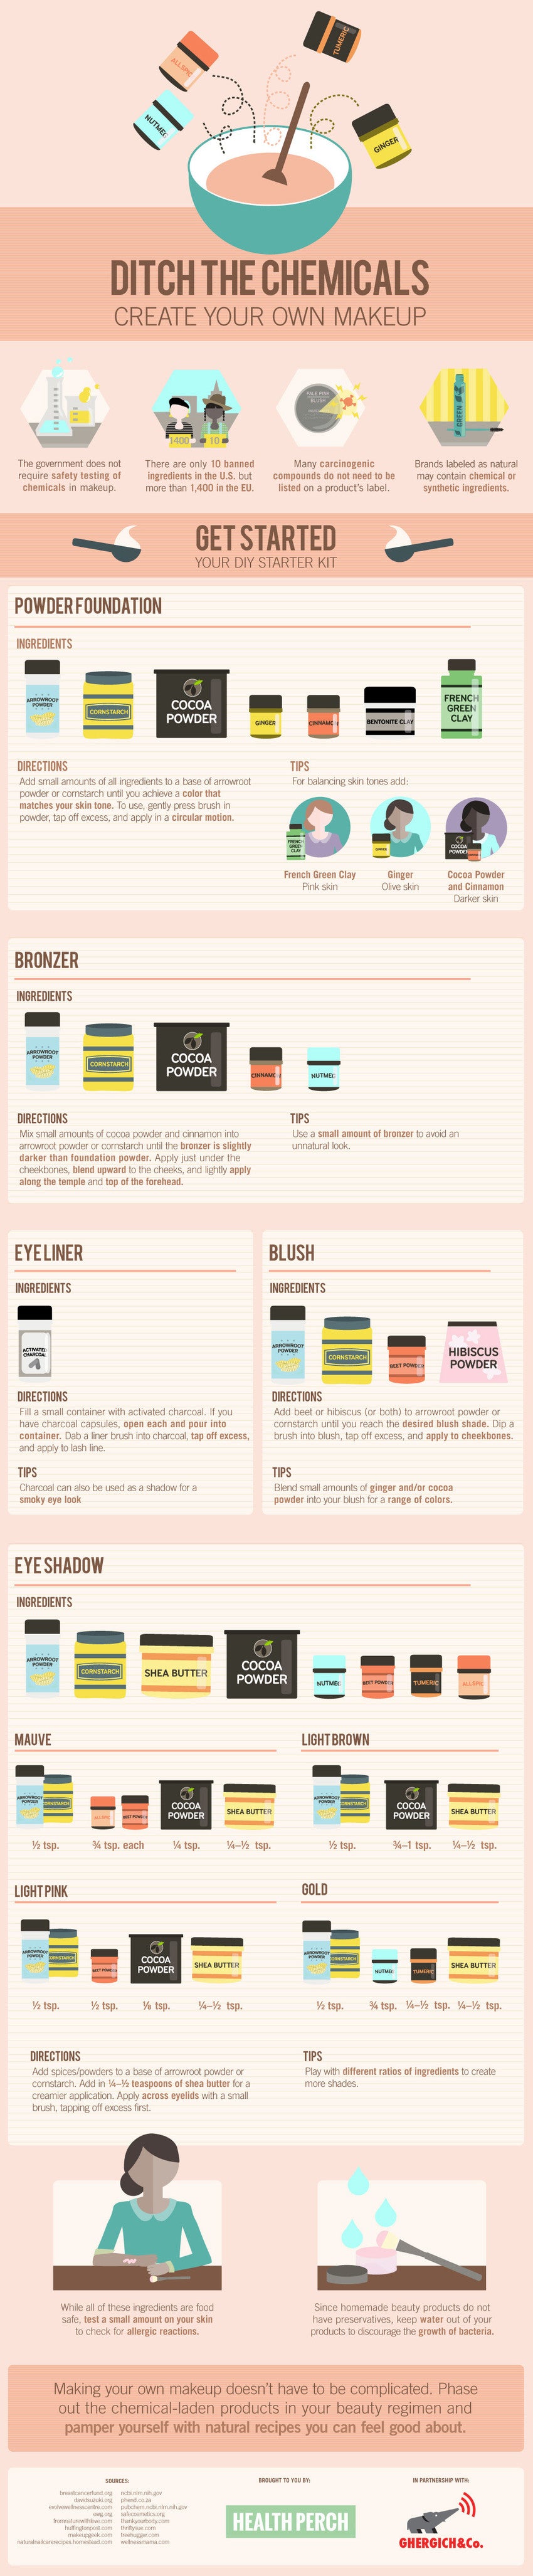 Create Your Own Makeup: Health Perch’s Guide to Chemical Free Cosmetics